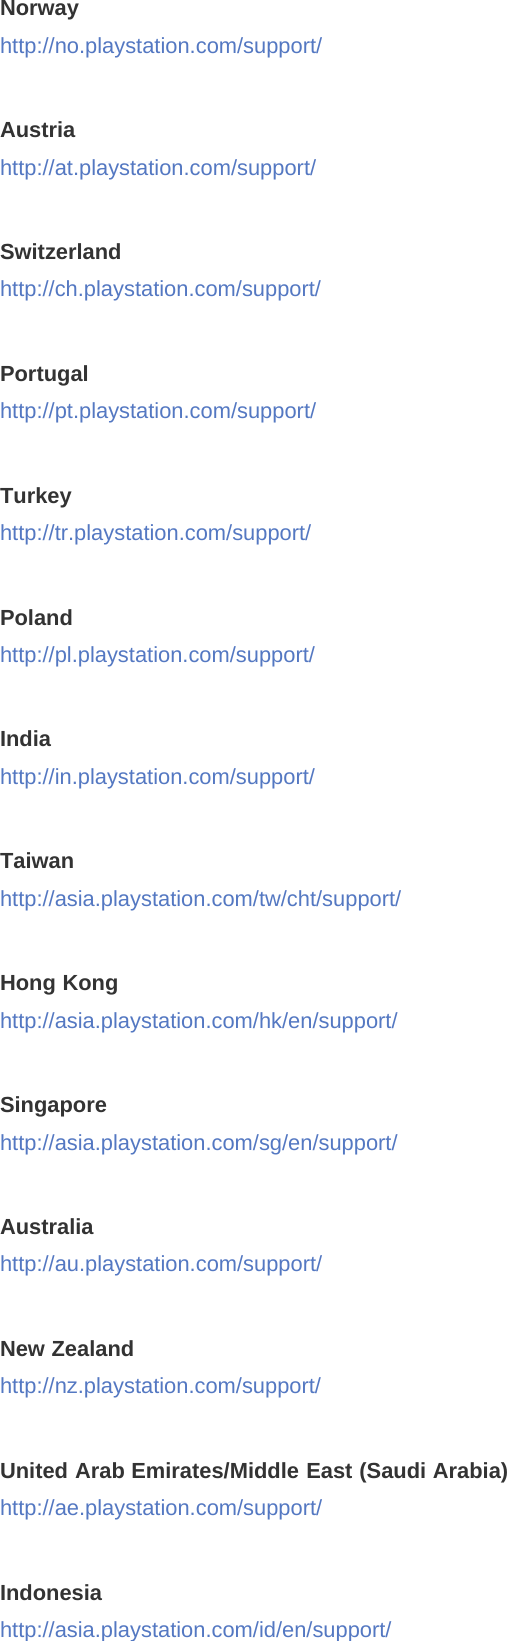 Norwayhttp://no.playstation.com/support/Austriahttp://at.playstation.com/support/Switzerlandhttp://ch.playstation.com/support/Portugalhttp://pt.playstation.com/support/Turkeyhttp://tr.playstation.com/support/Polandhttp://pl.playstation.com/support/Indiahttp://in.playstation.com/support/Taiwanhttp://asia.playstation.com/tw/cht/support/Hong Konghttp://asia.playstation.com/hk/en/support/Singaporehttp://asia.playstation.com/sg/en/support/Australiahttp://au.playstation.com/support/New Zealandhttp://nz.playstation.com/support/United Arab Emirates/Middle East (Saudi Arabia)http://ae.playstation.com/support/Indonesiahttp://asia.playstation.com/id/en/support/